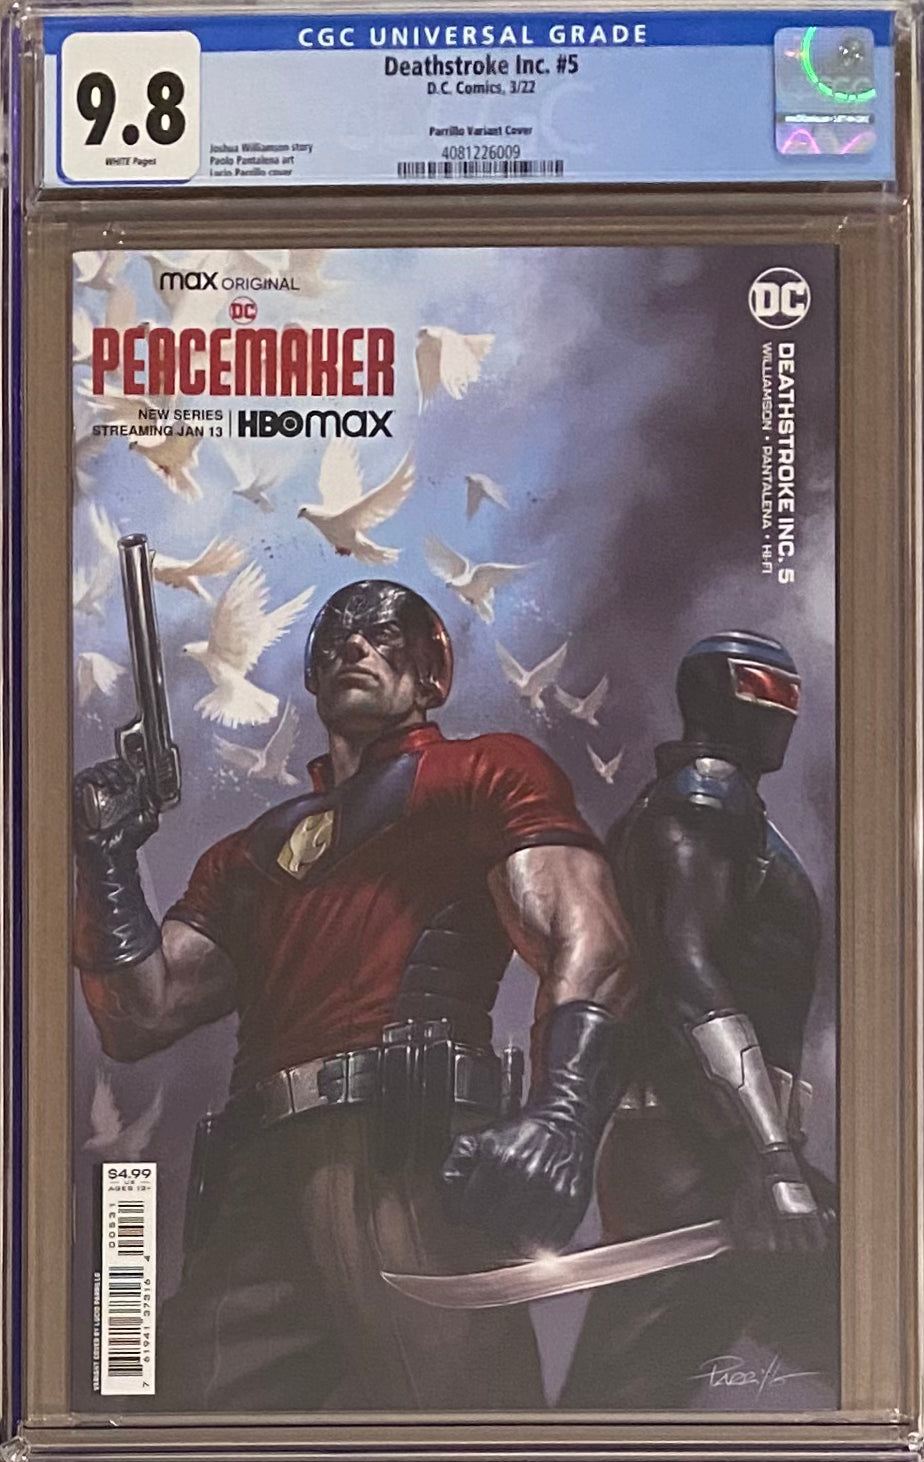 Deathstroke Inc. #5 Parrillo Peacemaker Variant CGC 9.8